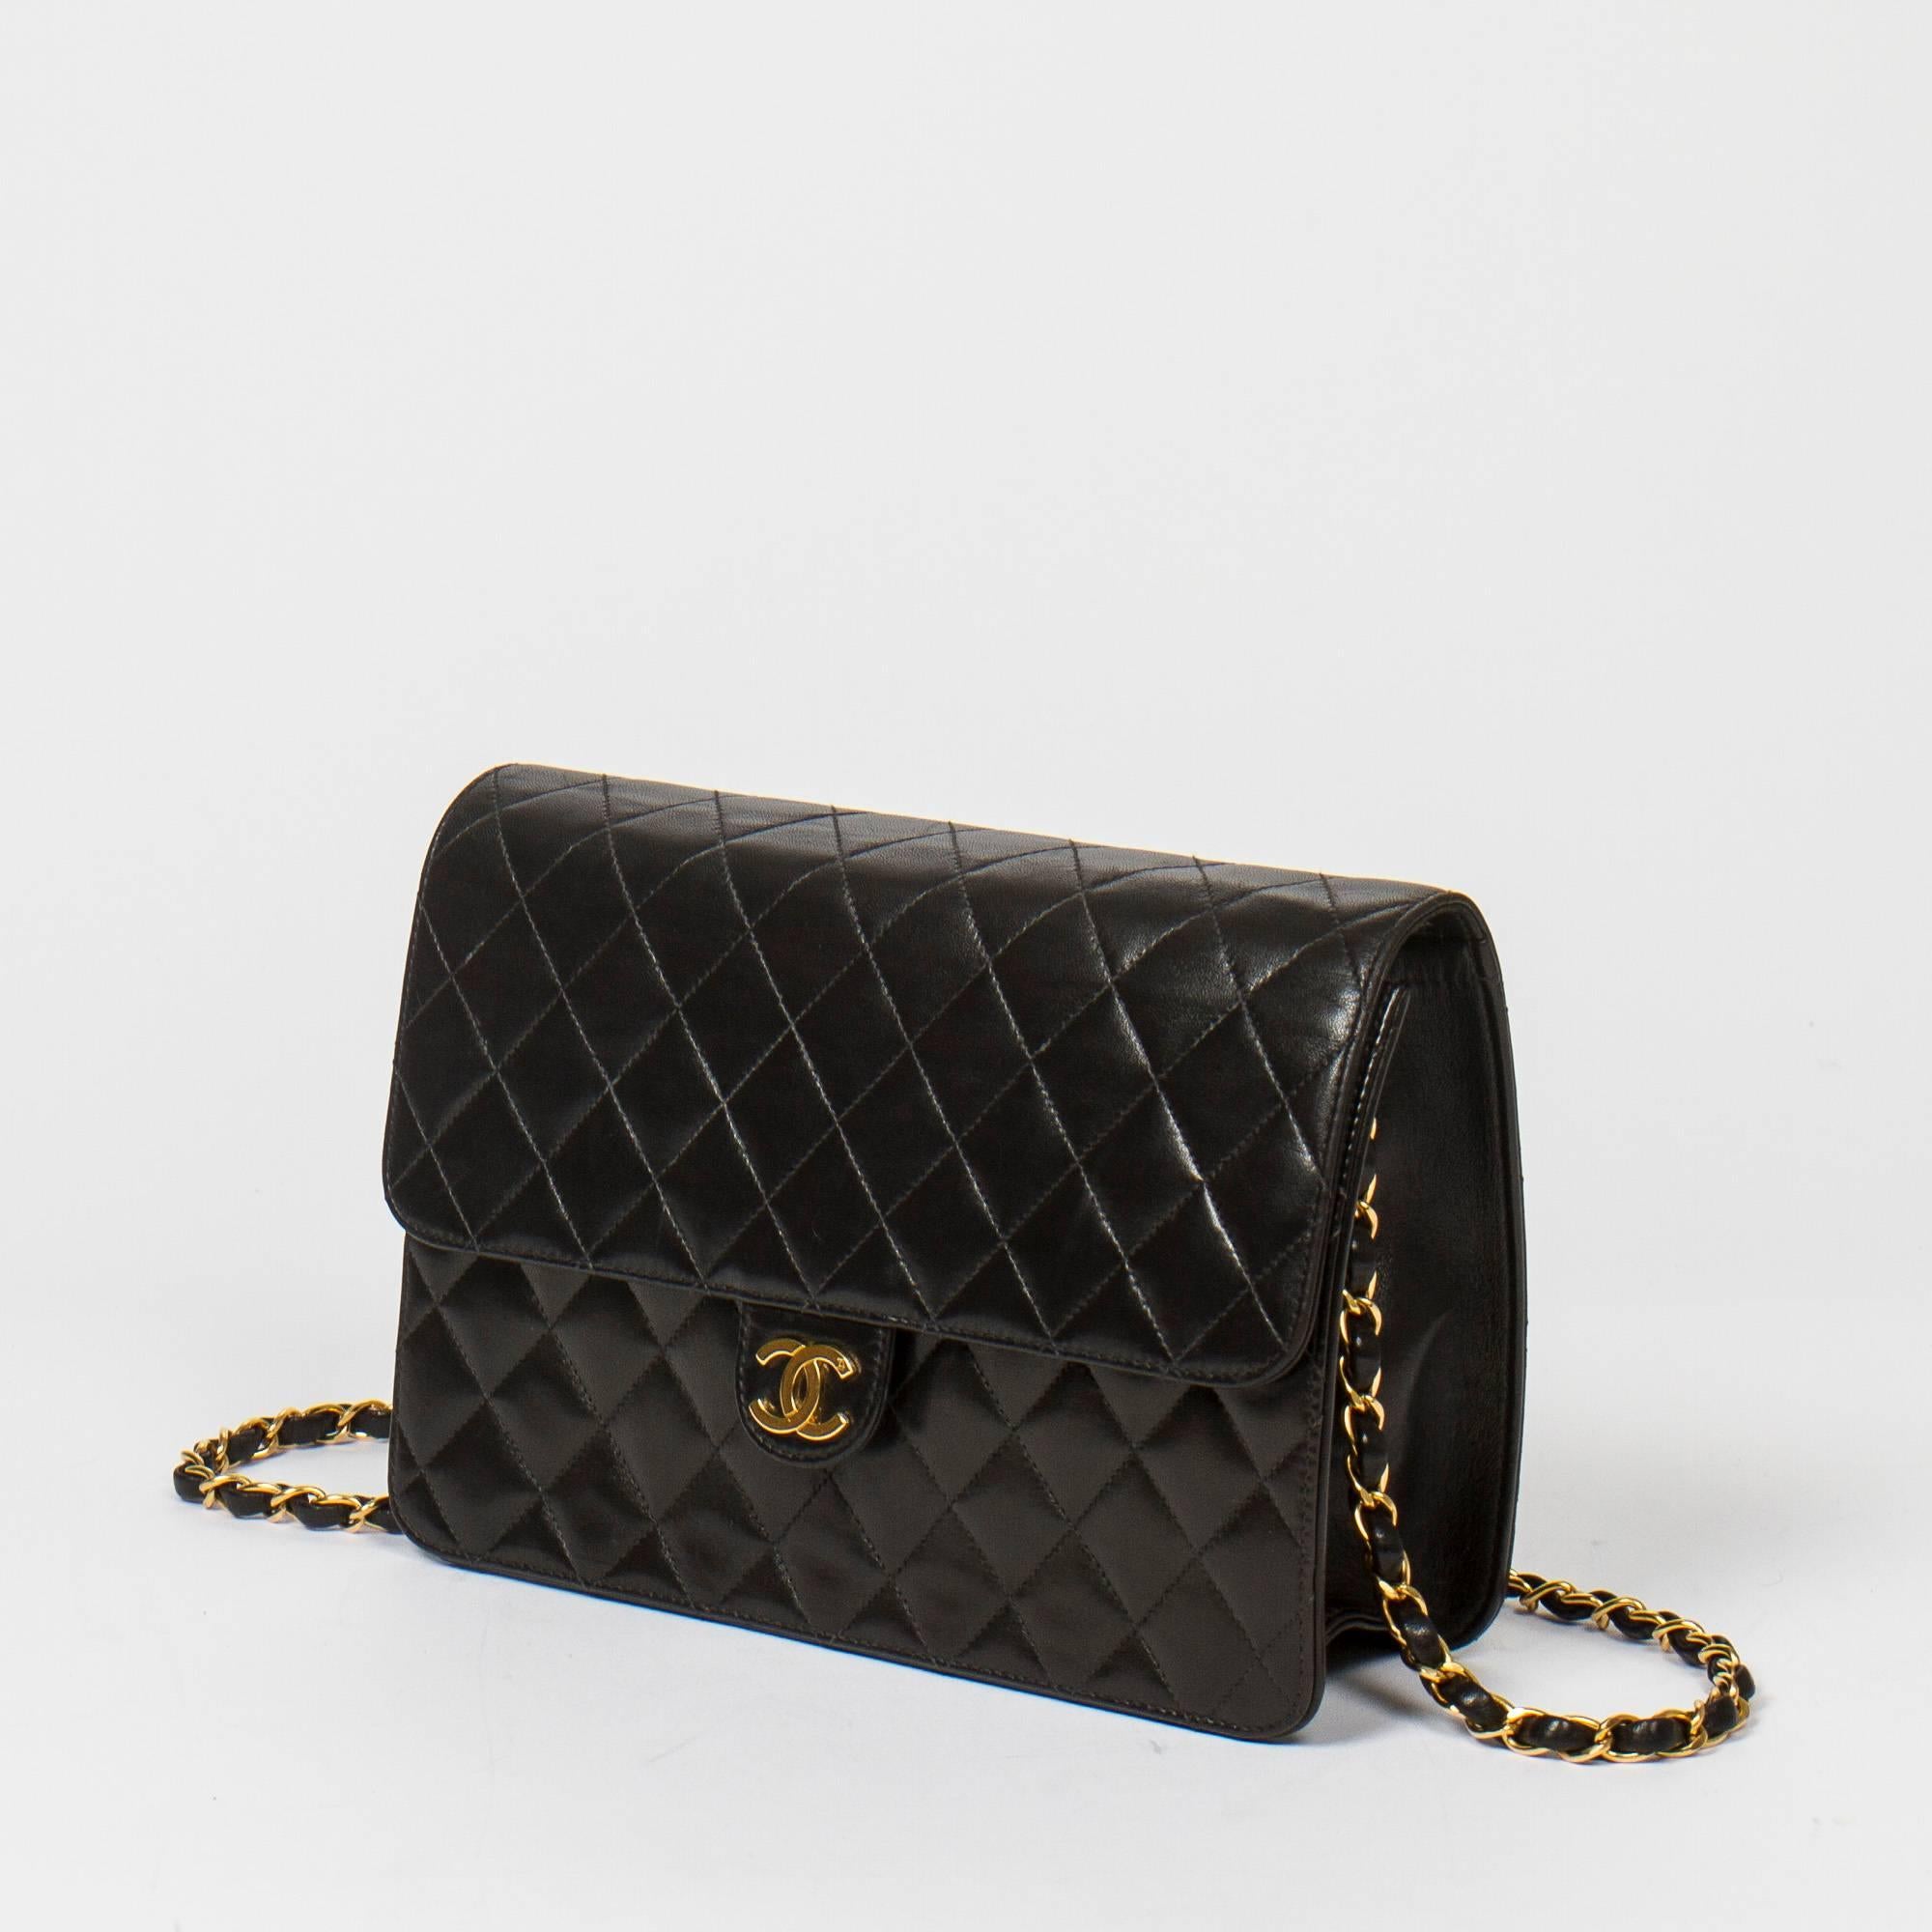 Vintage Mademoiselle Pochette shoulder bag in black quilted lambskin with gold tone chain strap interlaced with black leather. Gold tone CC press closure. Burgundy lined interior with one zip pocket. Gold tone heat stamp 